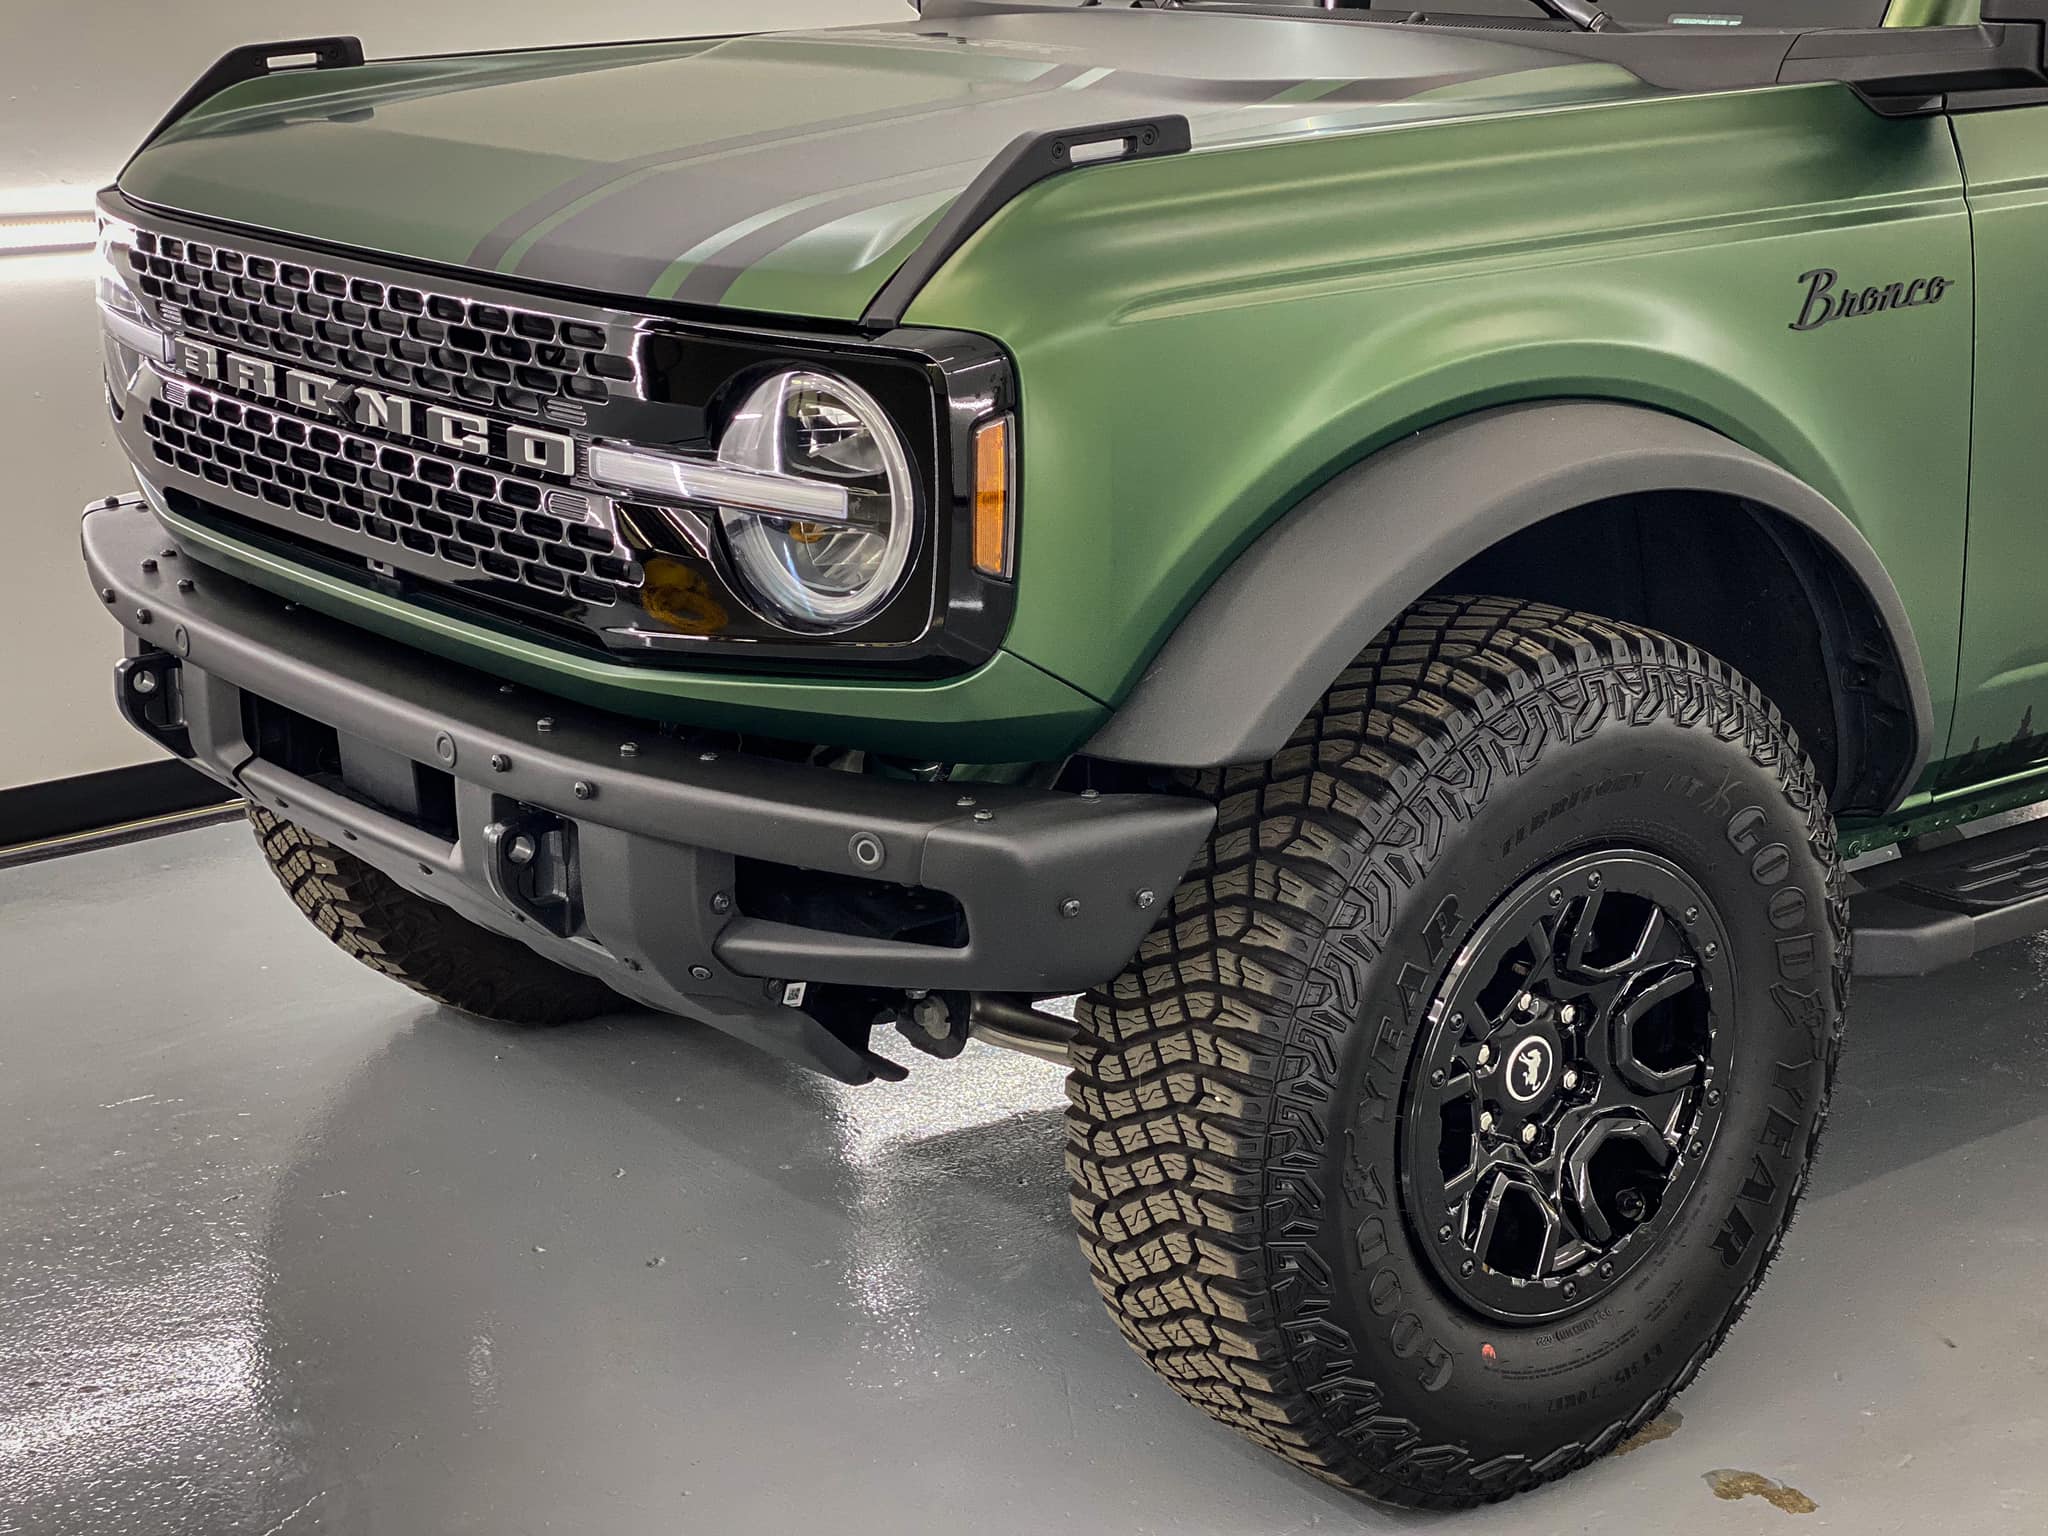 Eruption Green Bronco XPEL Stealth PPF Wrapped + Graphics + Racing Stripes 7.jpg